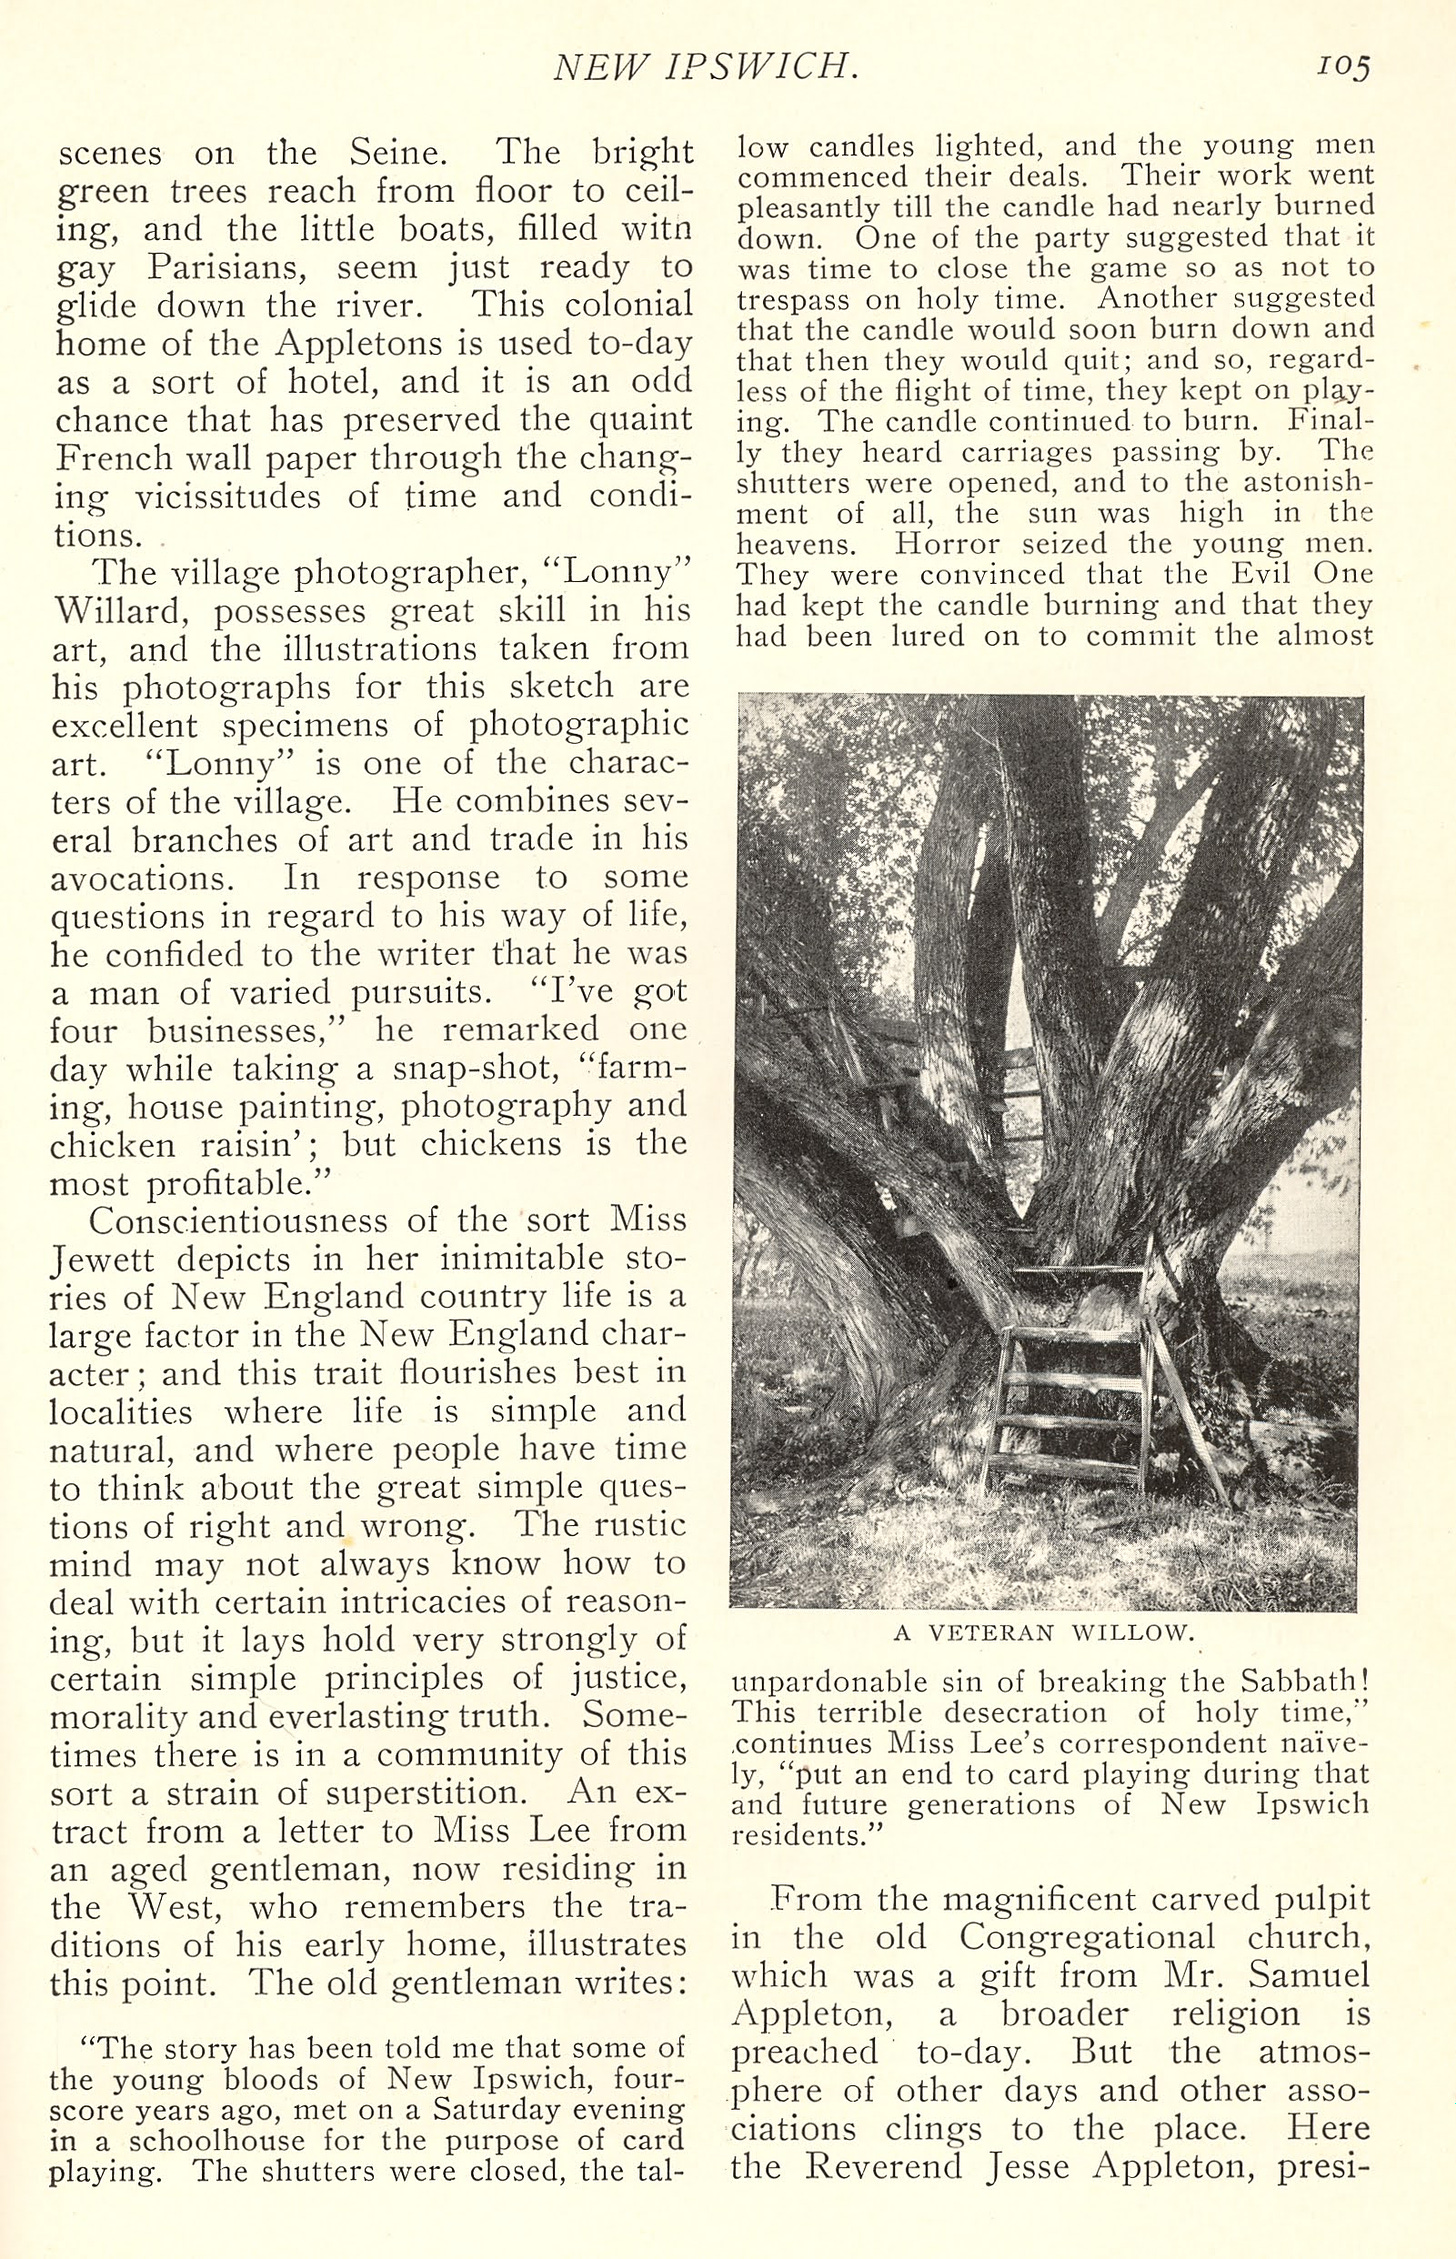 New England Magazine, March 1900, page 105